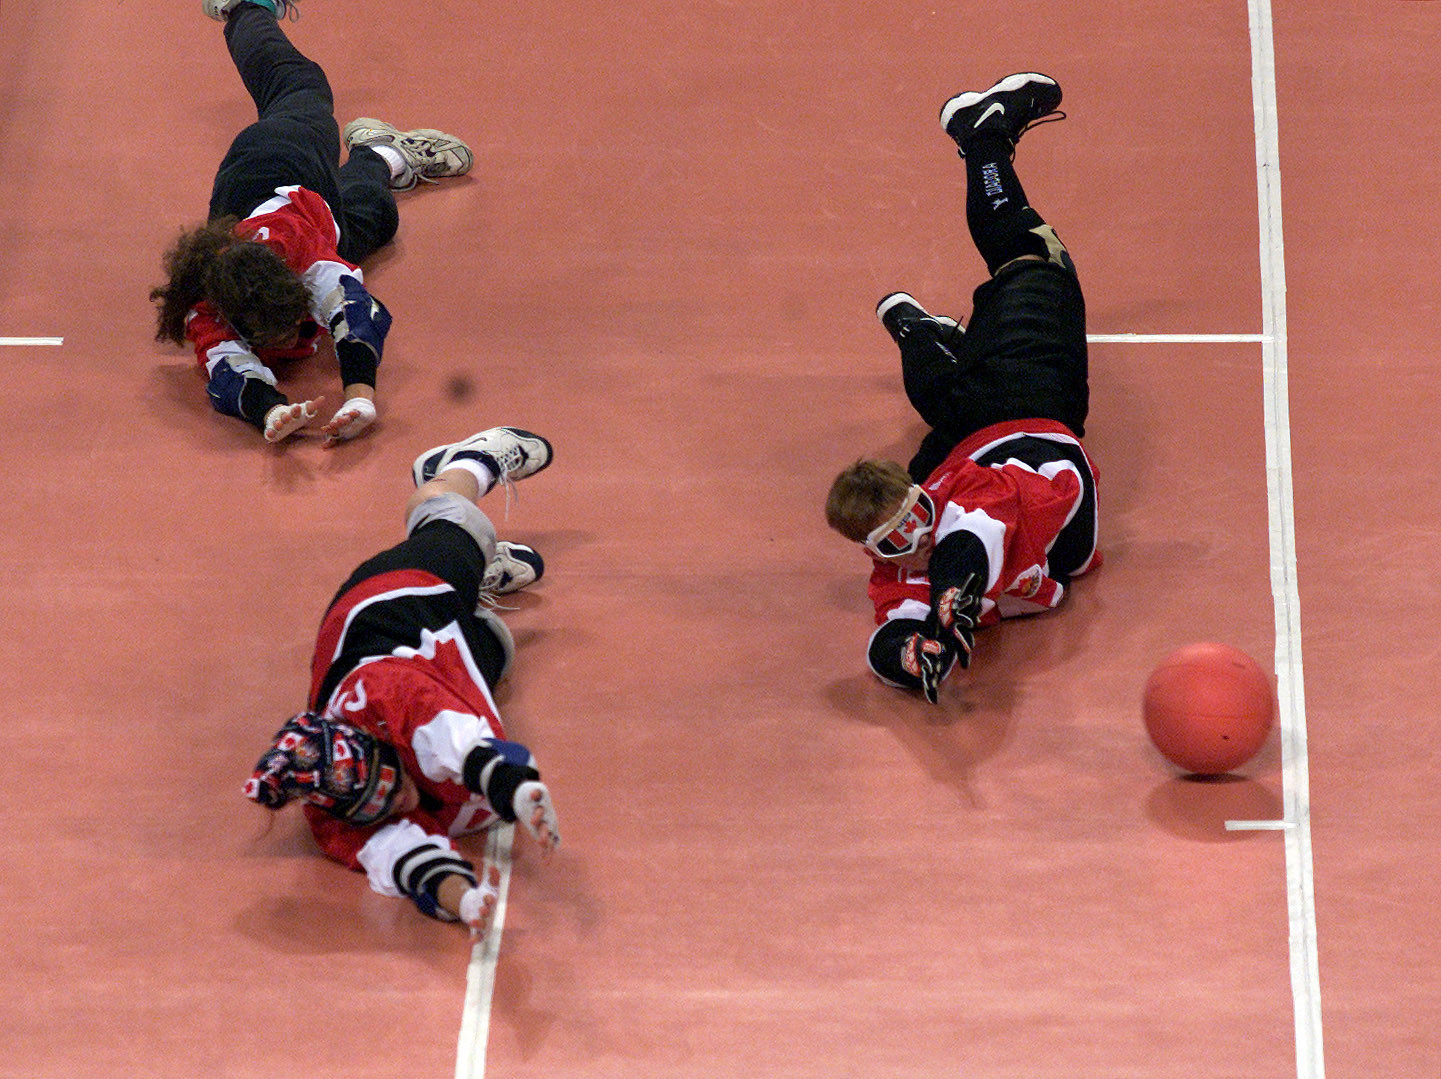 IBSA Goalball World Championships in Hangzhou cancelled over travel